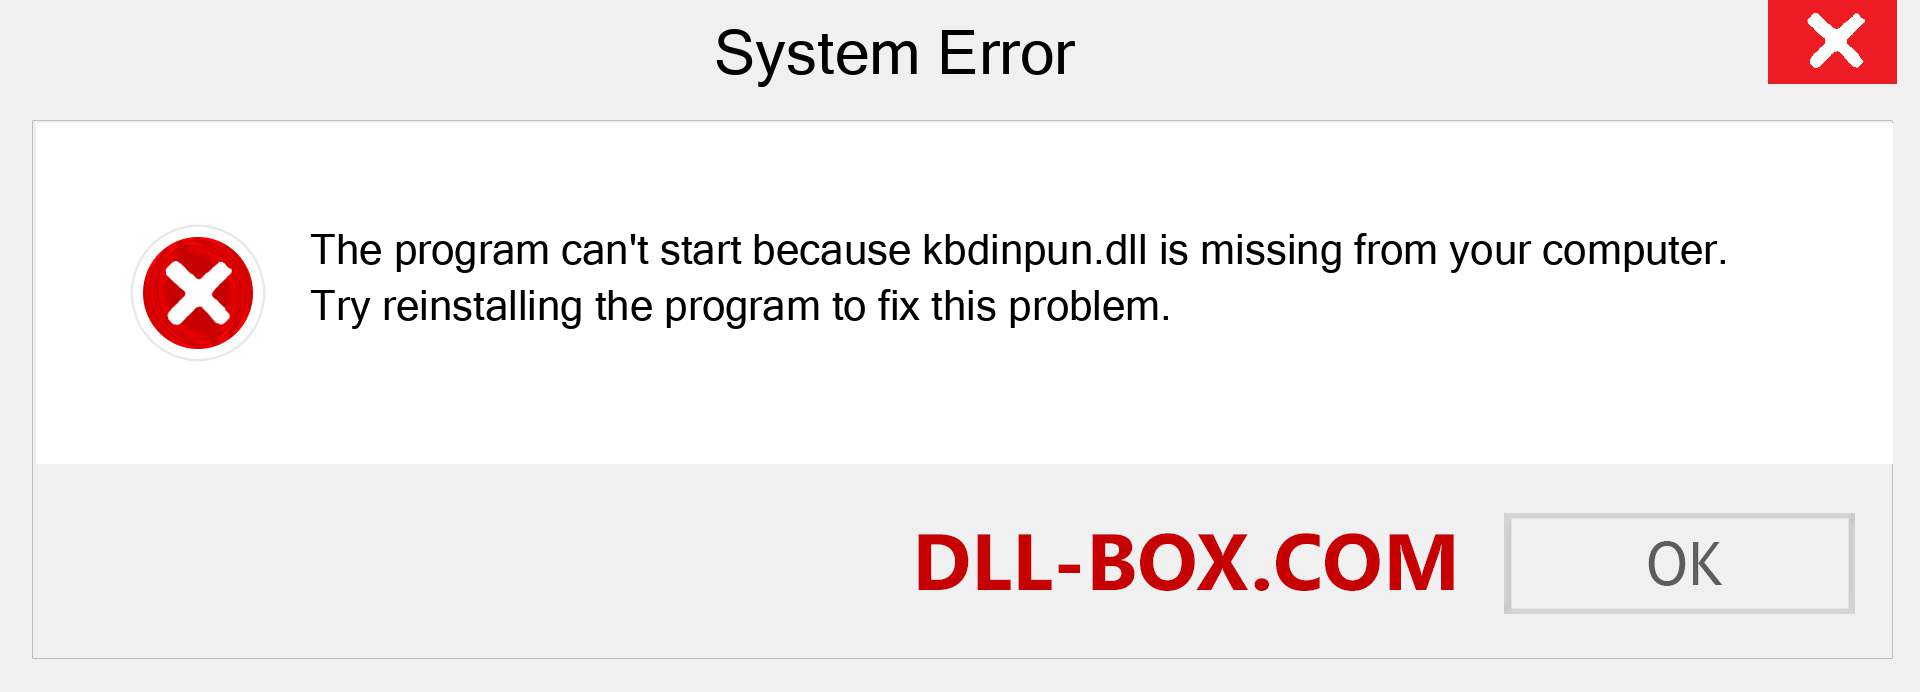  kbdinpun.dll file is missing?. Download for Windows 7, 8, 10 - Fix  kbdinpun dll Missing Error on Windows, photos, images